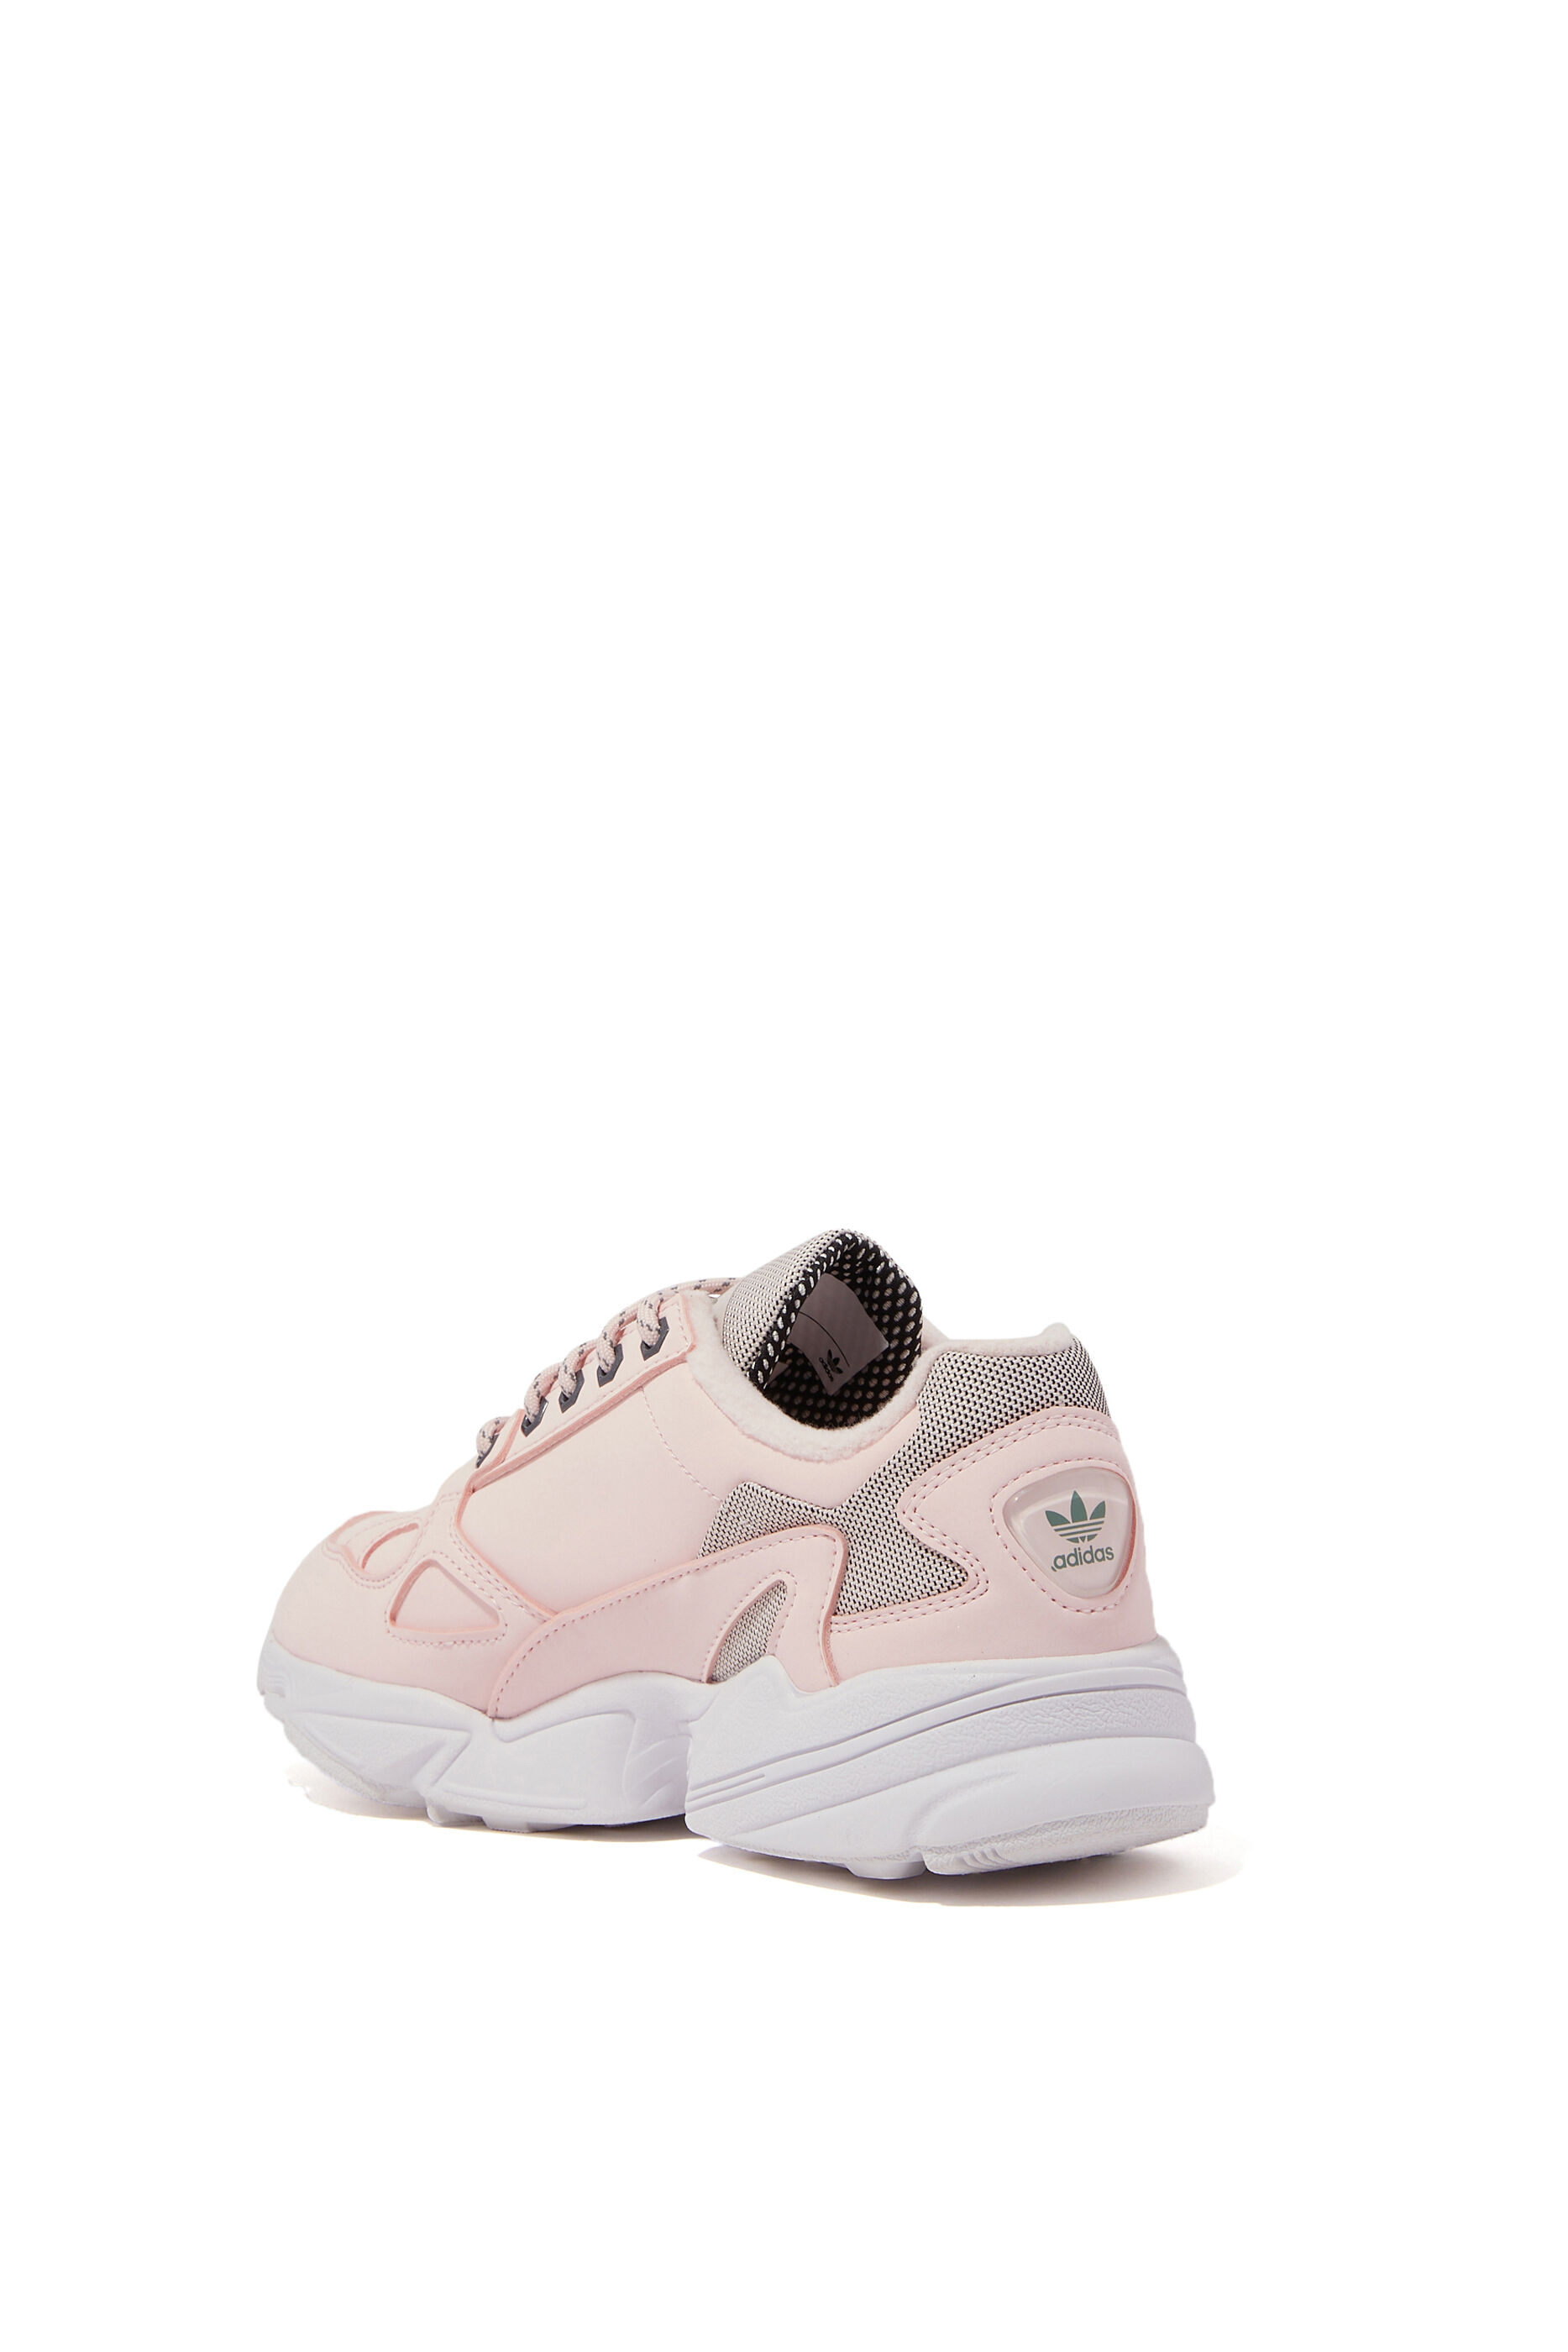 adidas originals falcon pale pink trainers